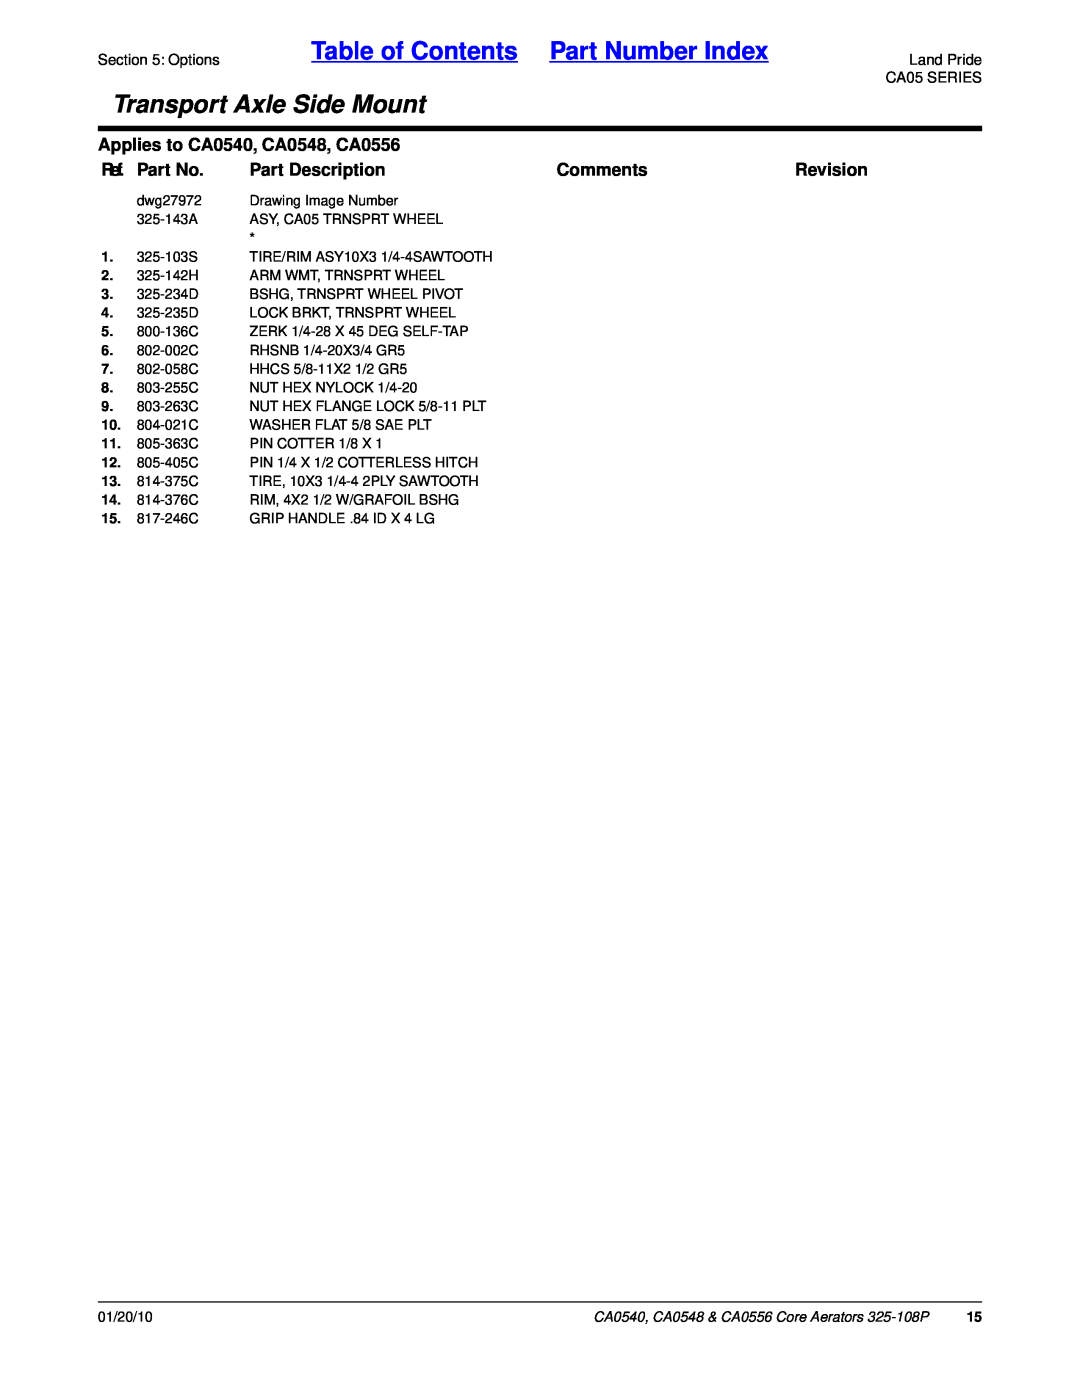 Land Pride Table of Contents Part Number Index, Transport Axle Side Mount, Applies to CA0540, CA0548, CA0556, Comments 